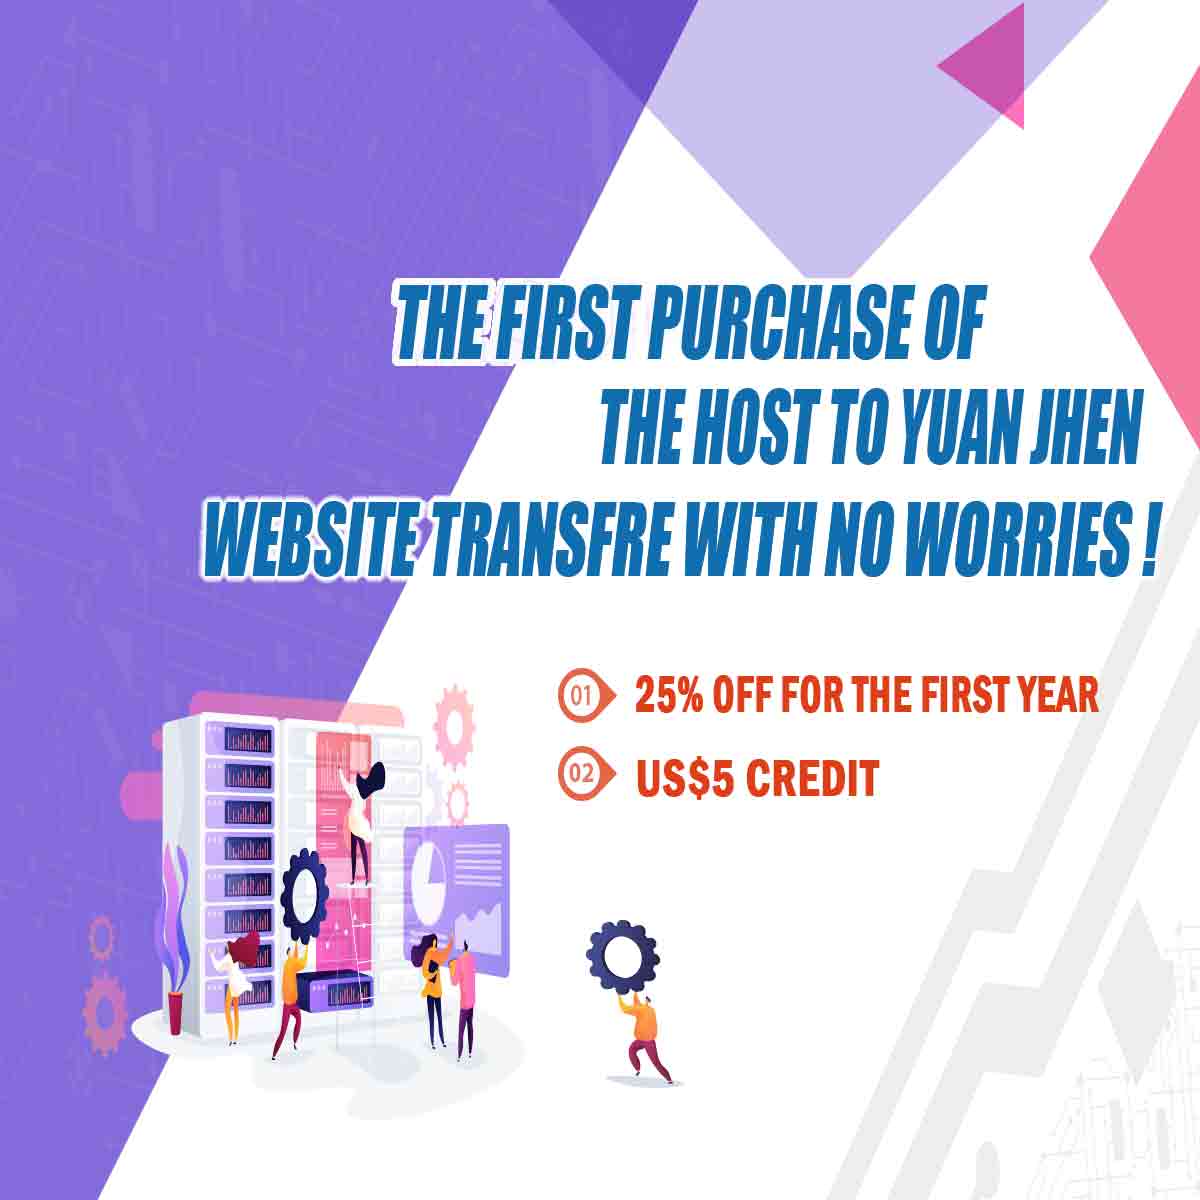 first choice to purchase web hosting｜Yuan-Jhen